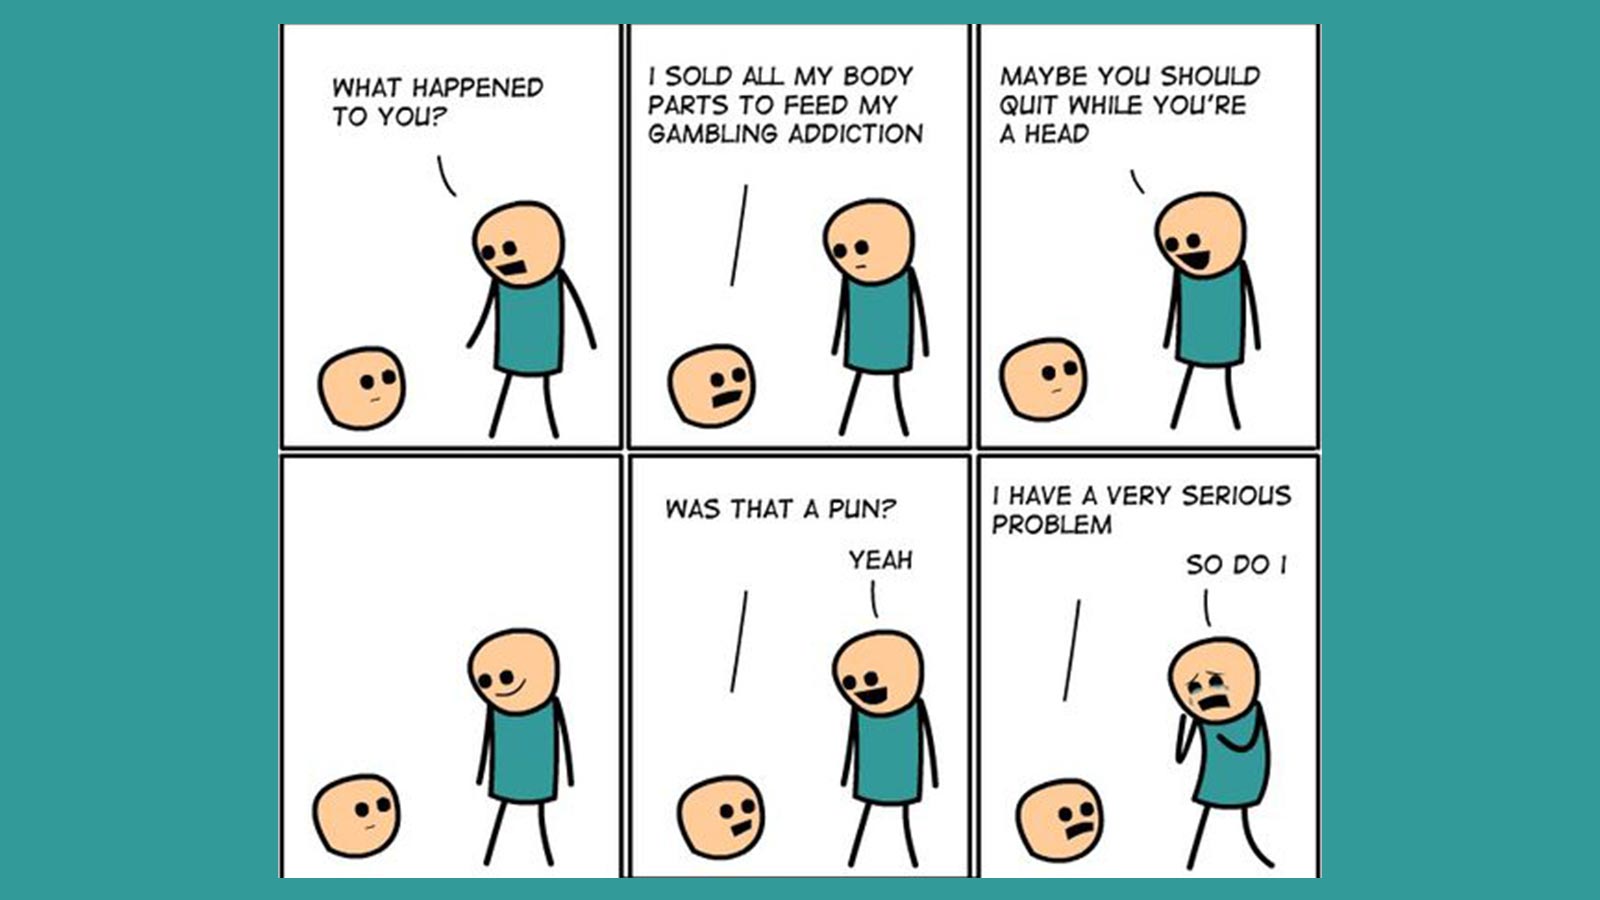 A Cyanide and Happiness Classic from Explosm.net